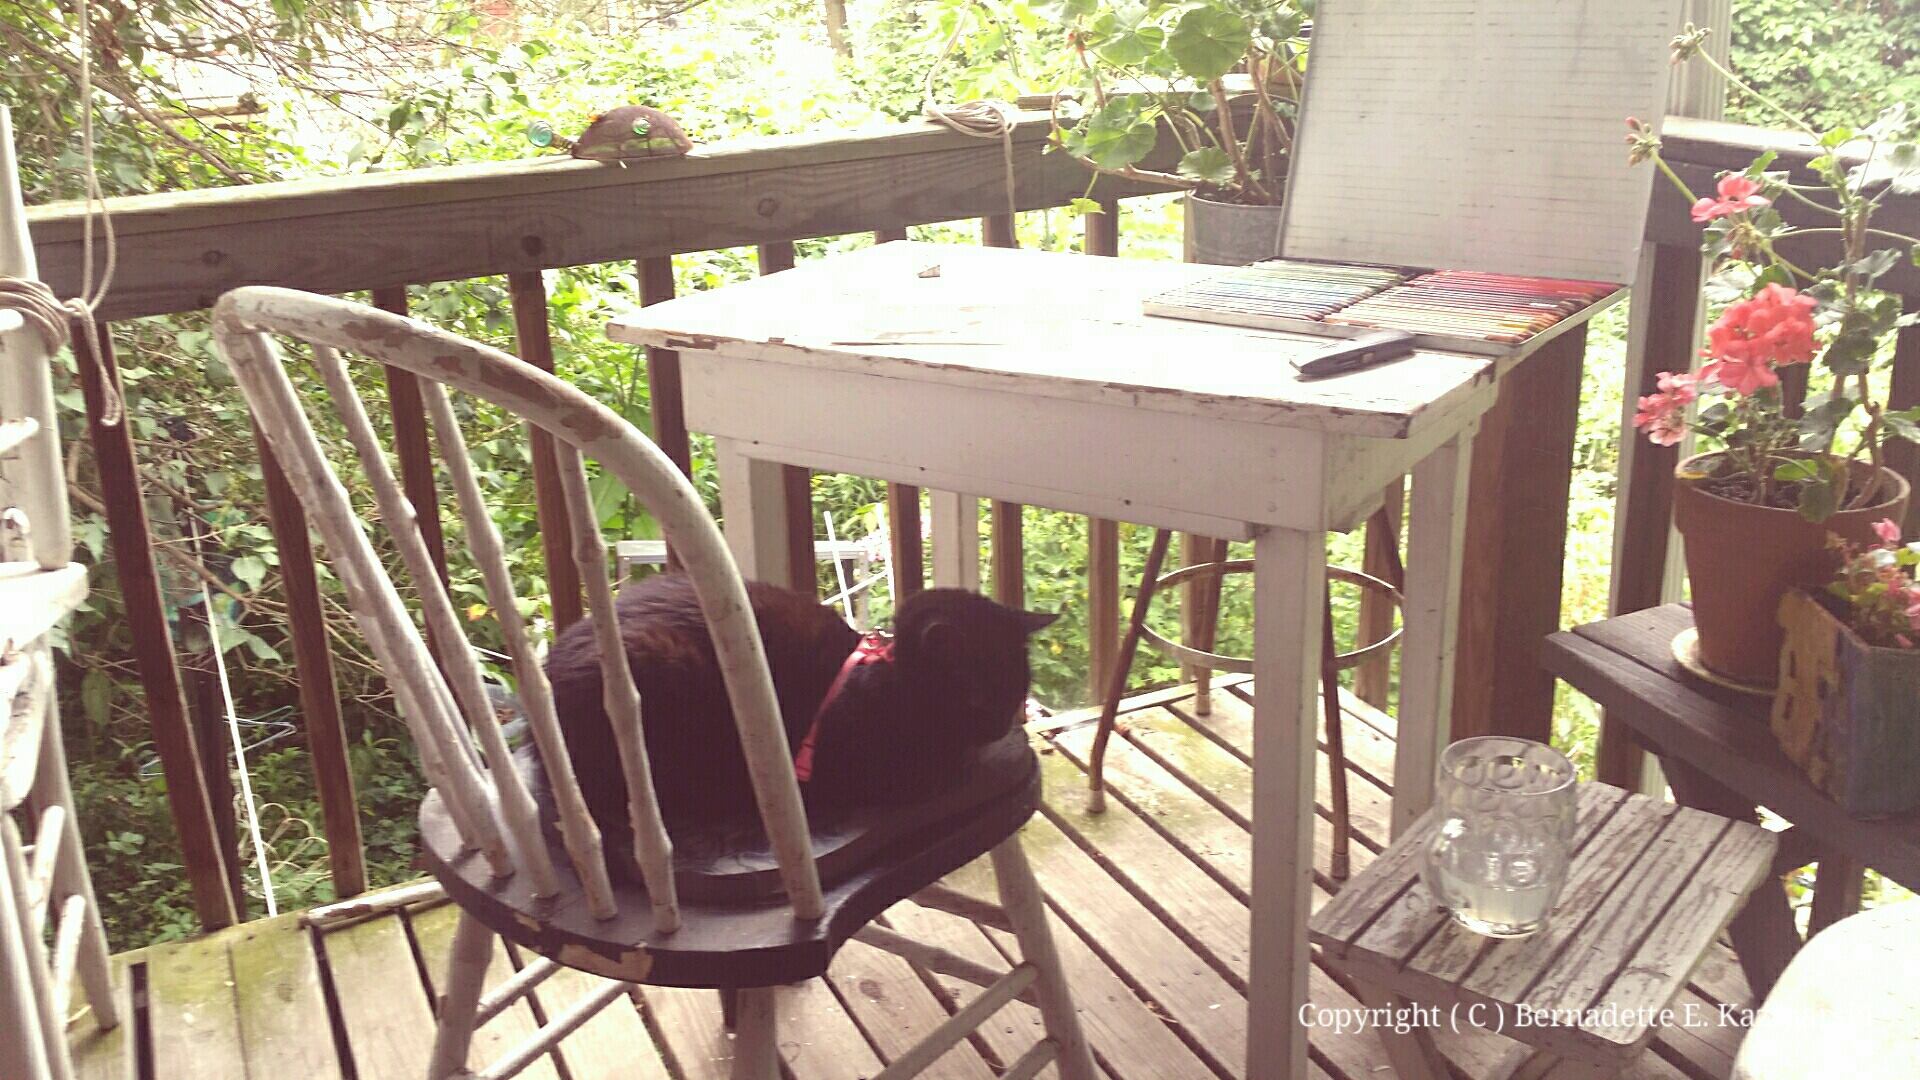 It even happens when you're working outside. I stood up from my worktable and Mimi stepped on my chair and settled down as if she'd been there all day.